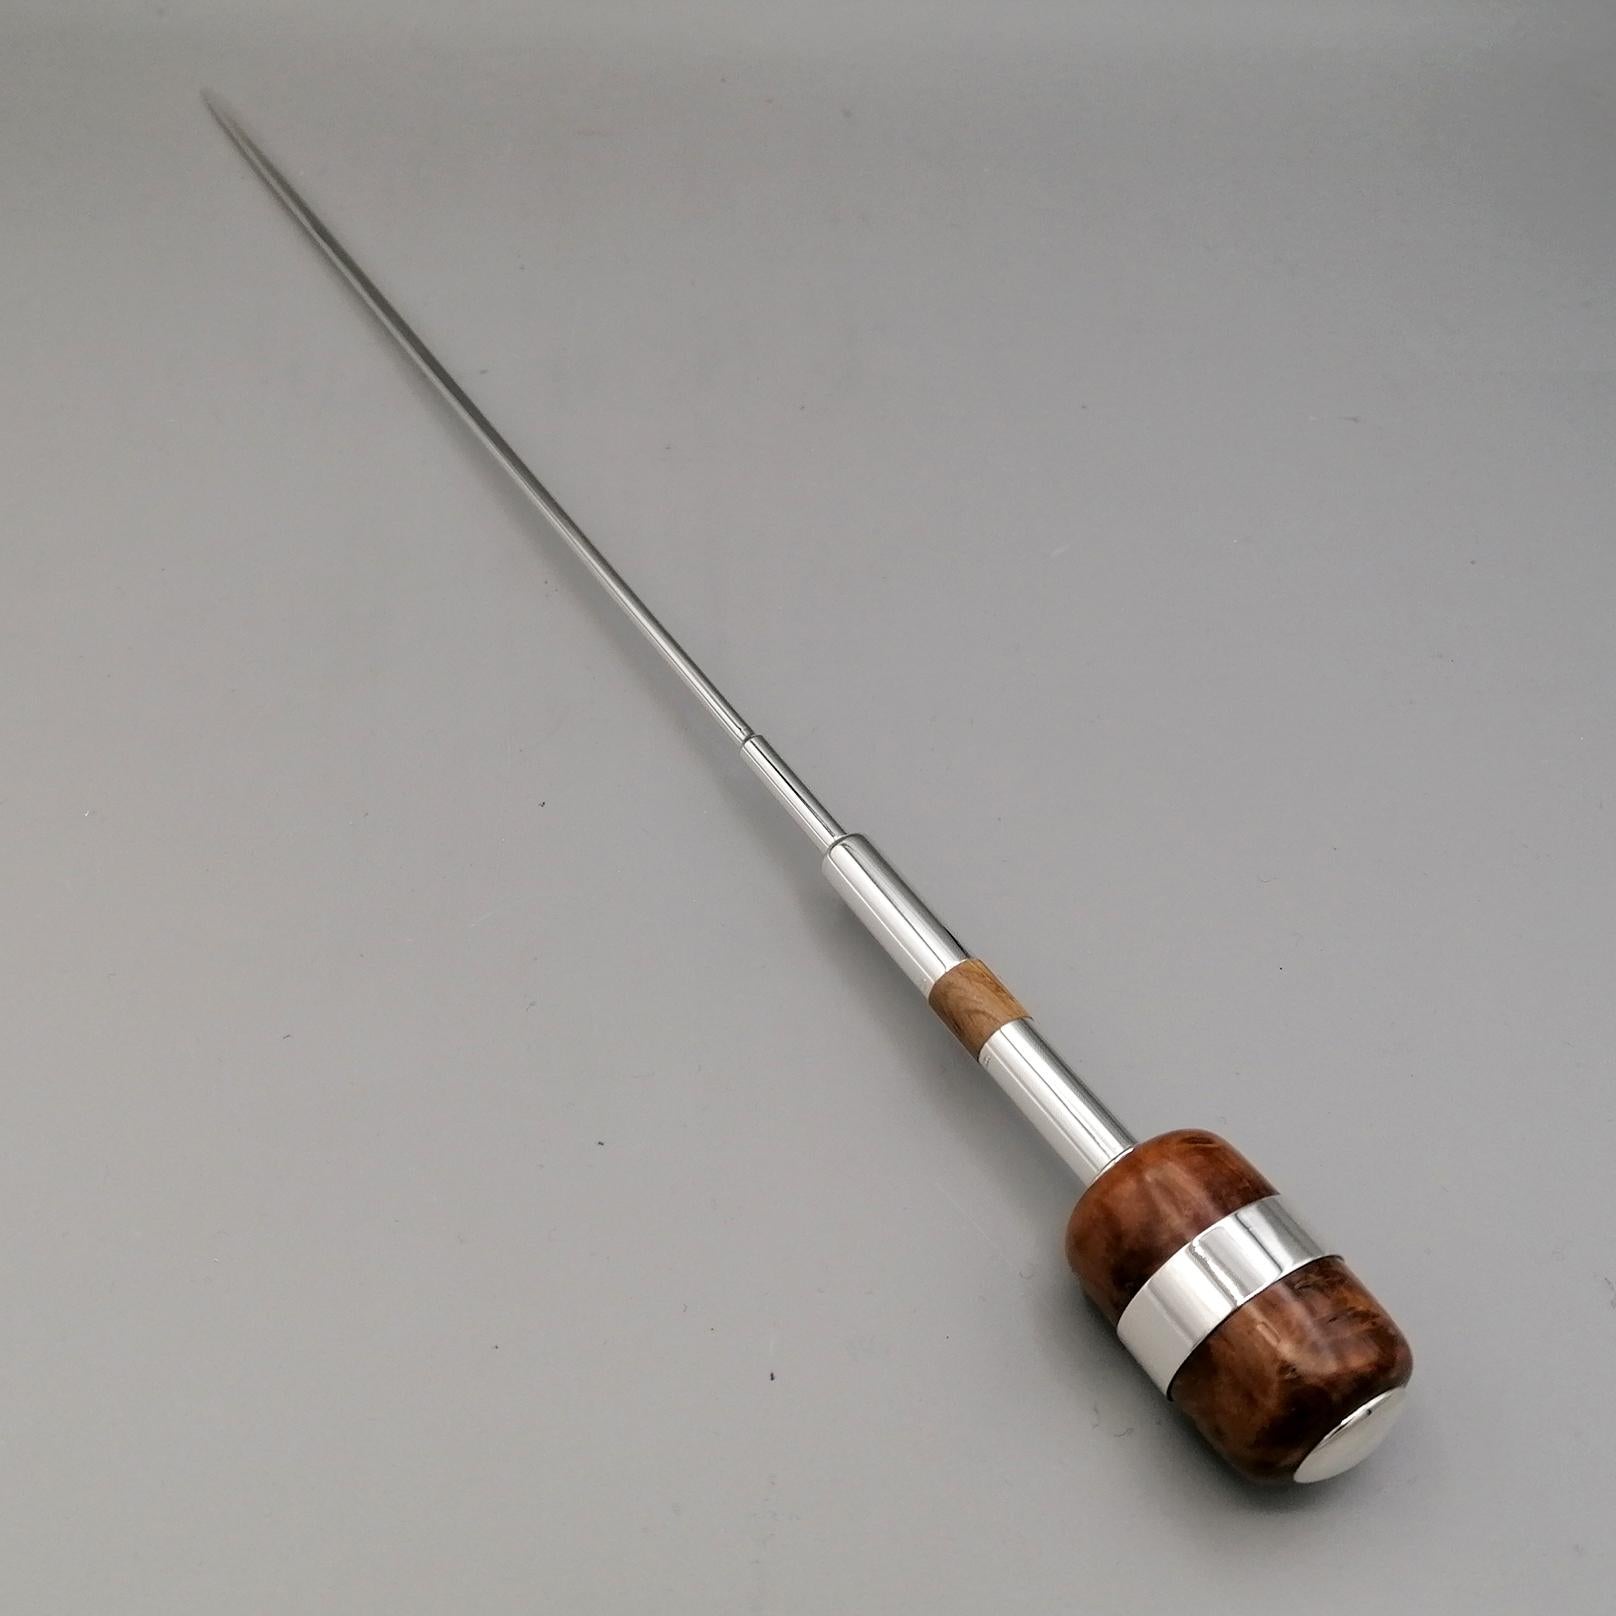 21th Century Italian sterling silver and wood conductor' baton.
Conductor's baton in sterling silver with wood inlays.
The wand is completely handmade starting from the silver plate.
The barrel of the baton is hollow and lightweight, suitable for